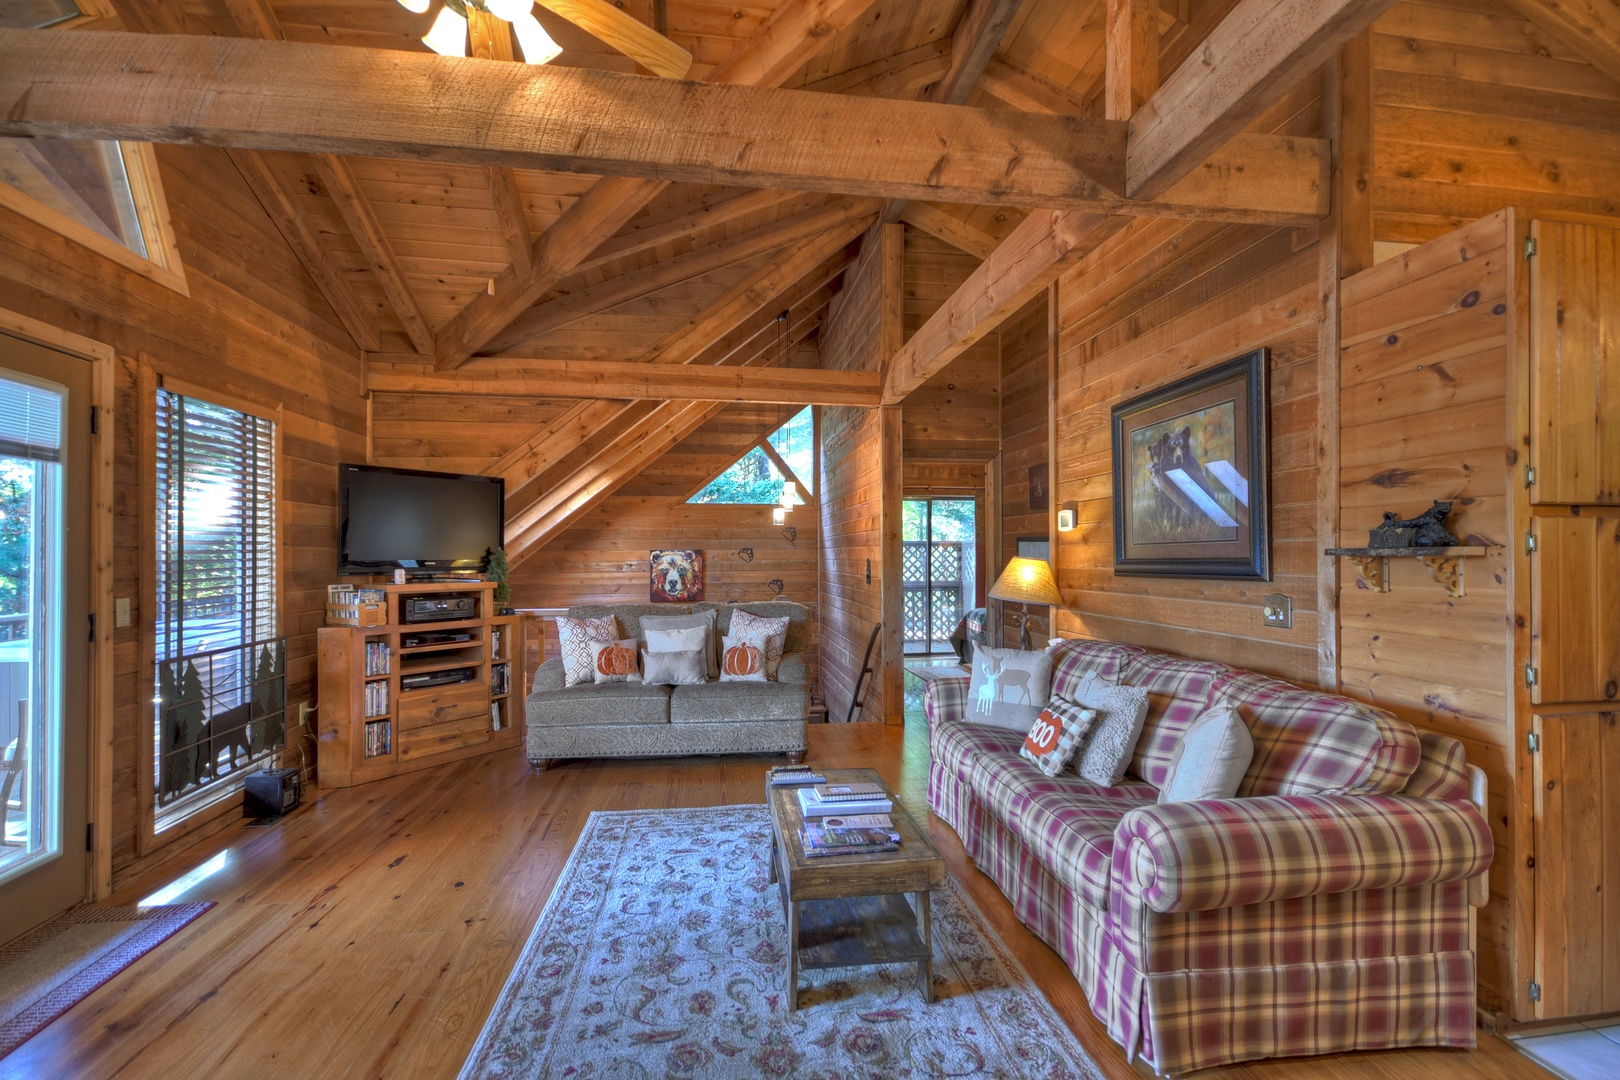 The Good Place- Living area with rustic ceiling design